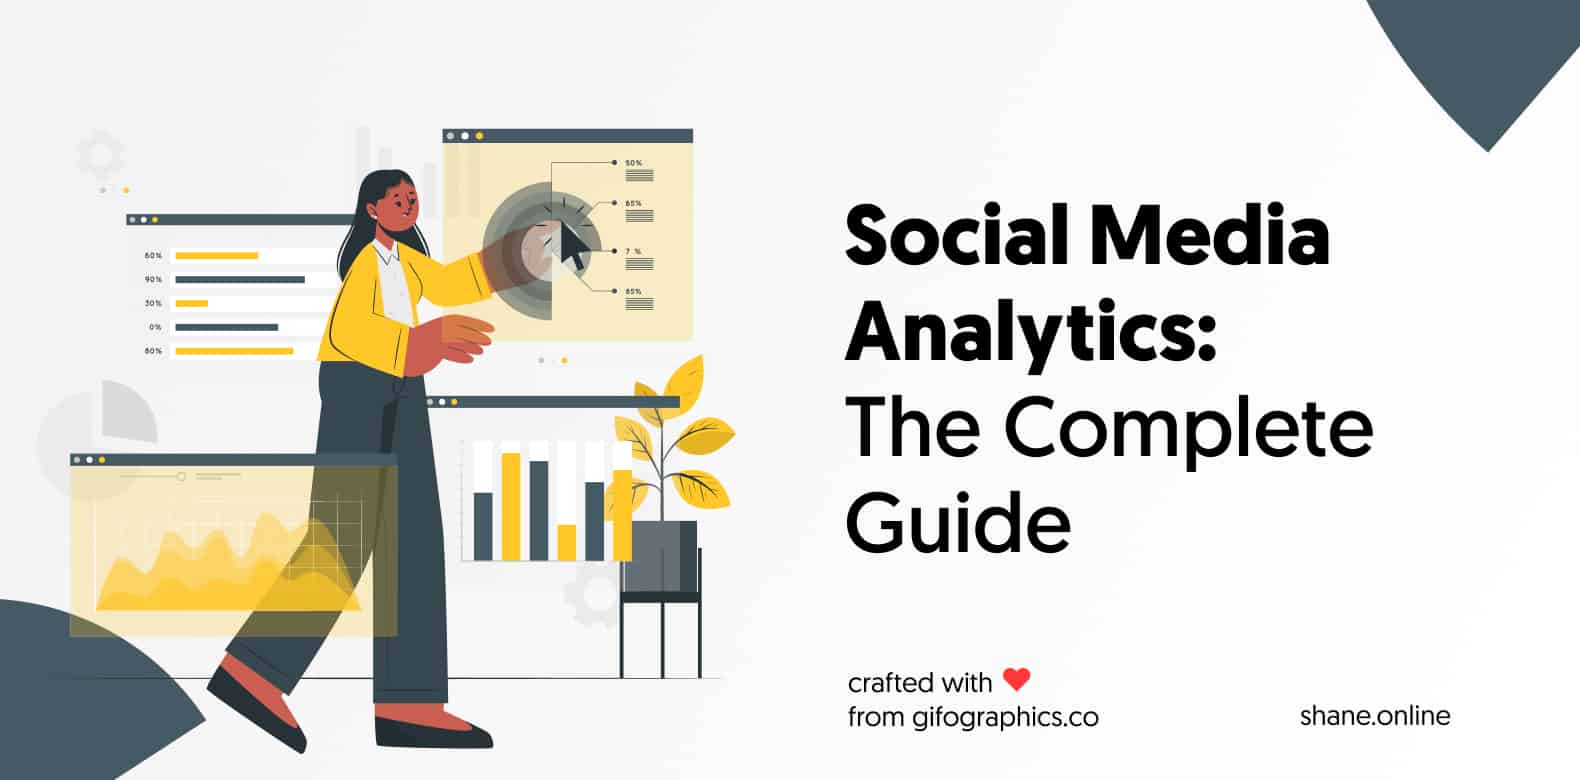 Social Media Analytics: The Complete Guide